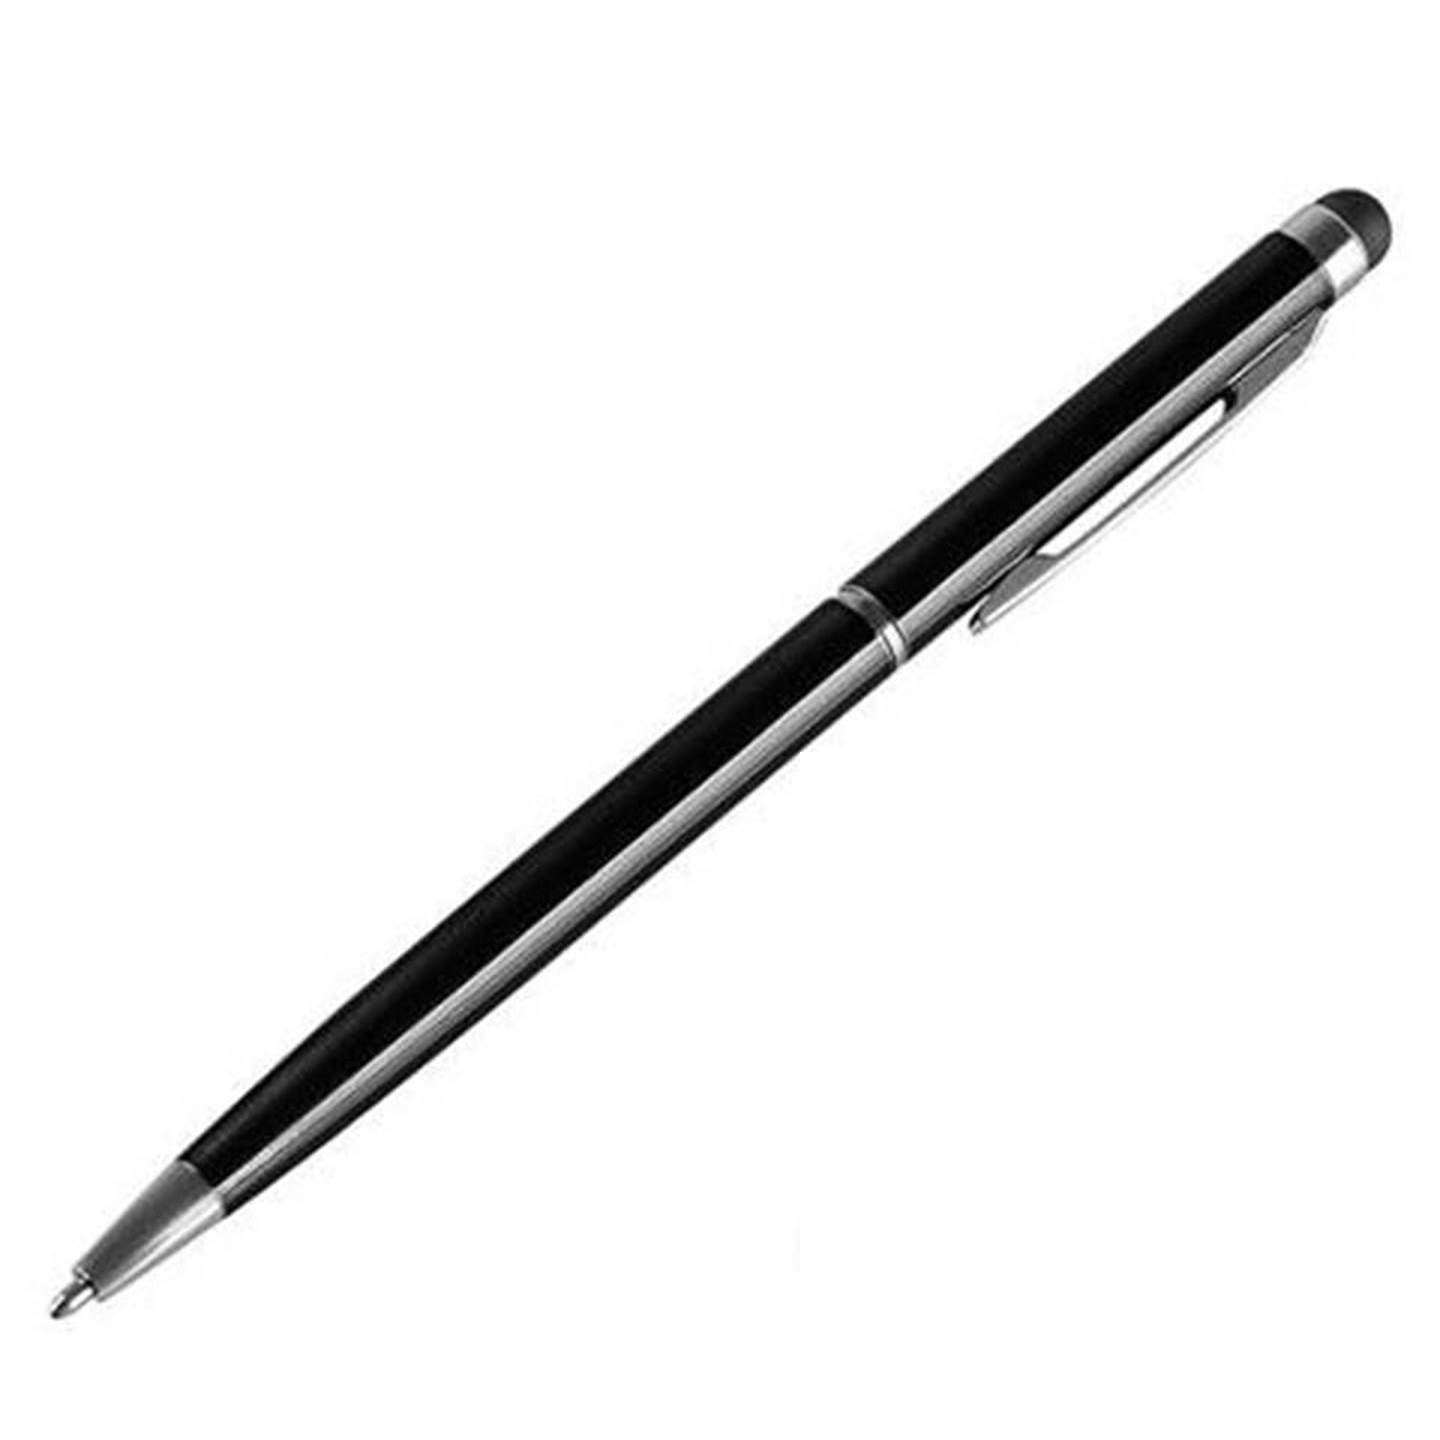 2in1 Touch Screen Stylus Ballpoint Pen iPad iPhone Galaxy Smartphone Tablet PC 